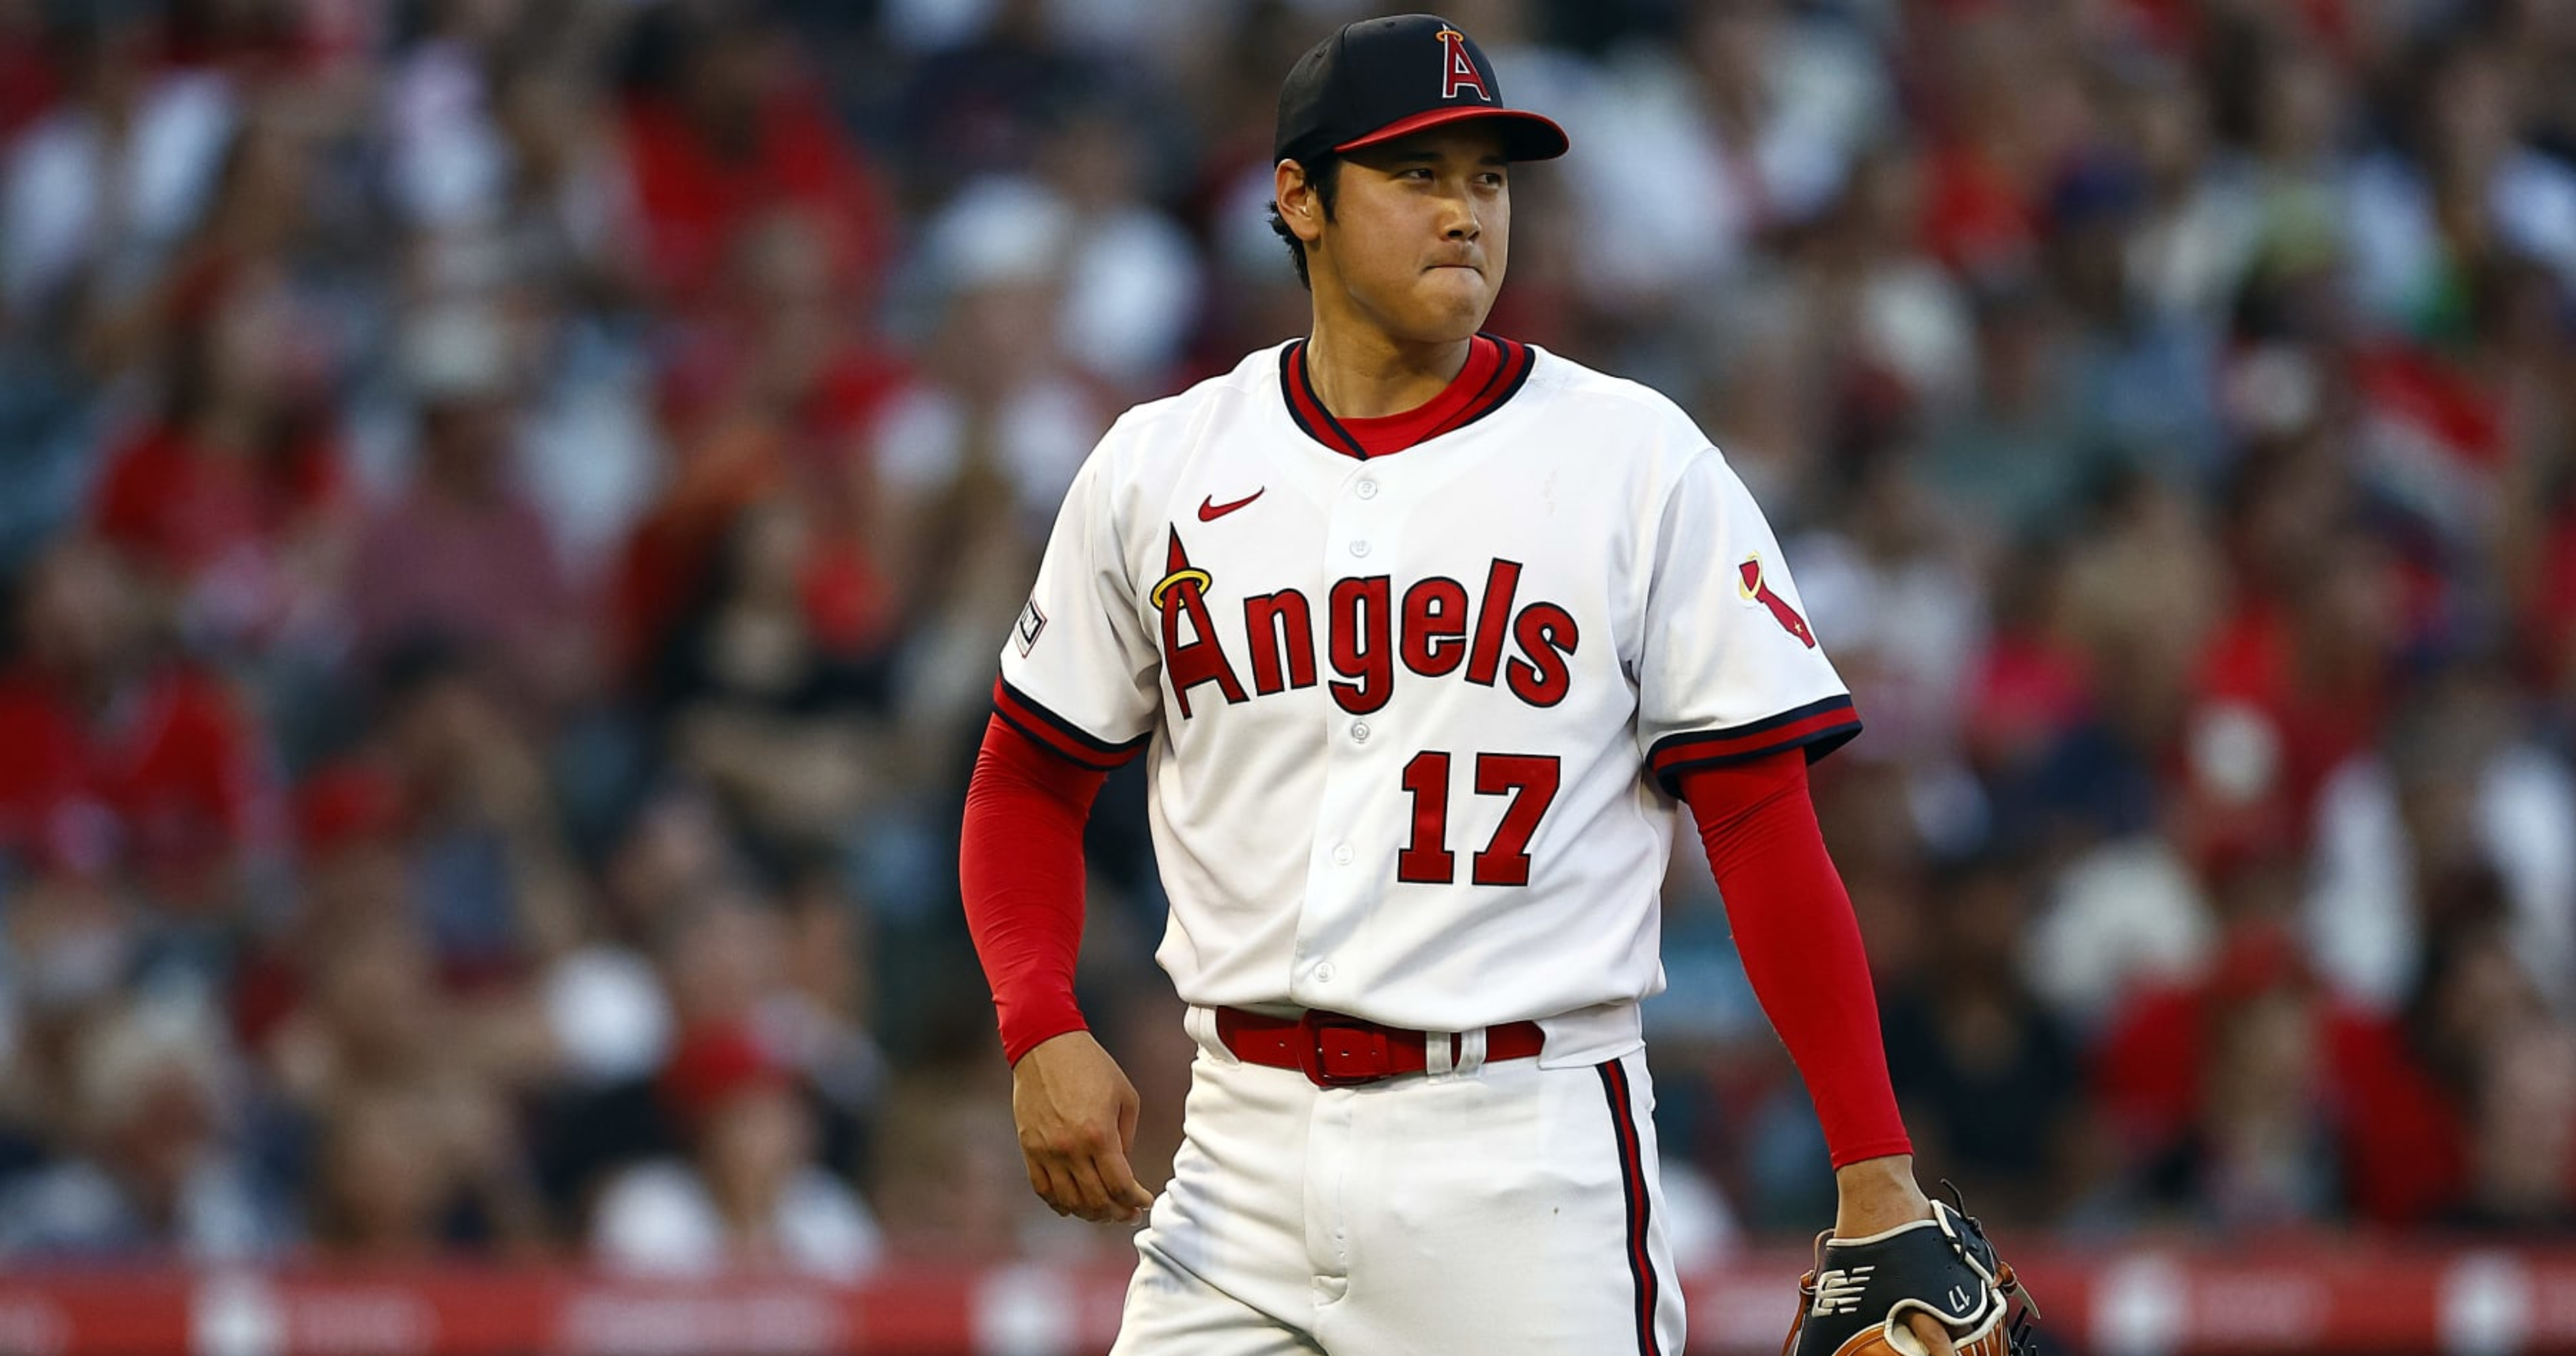 Angels' Ohtani to start Opening Day, won't comment on pending free agency